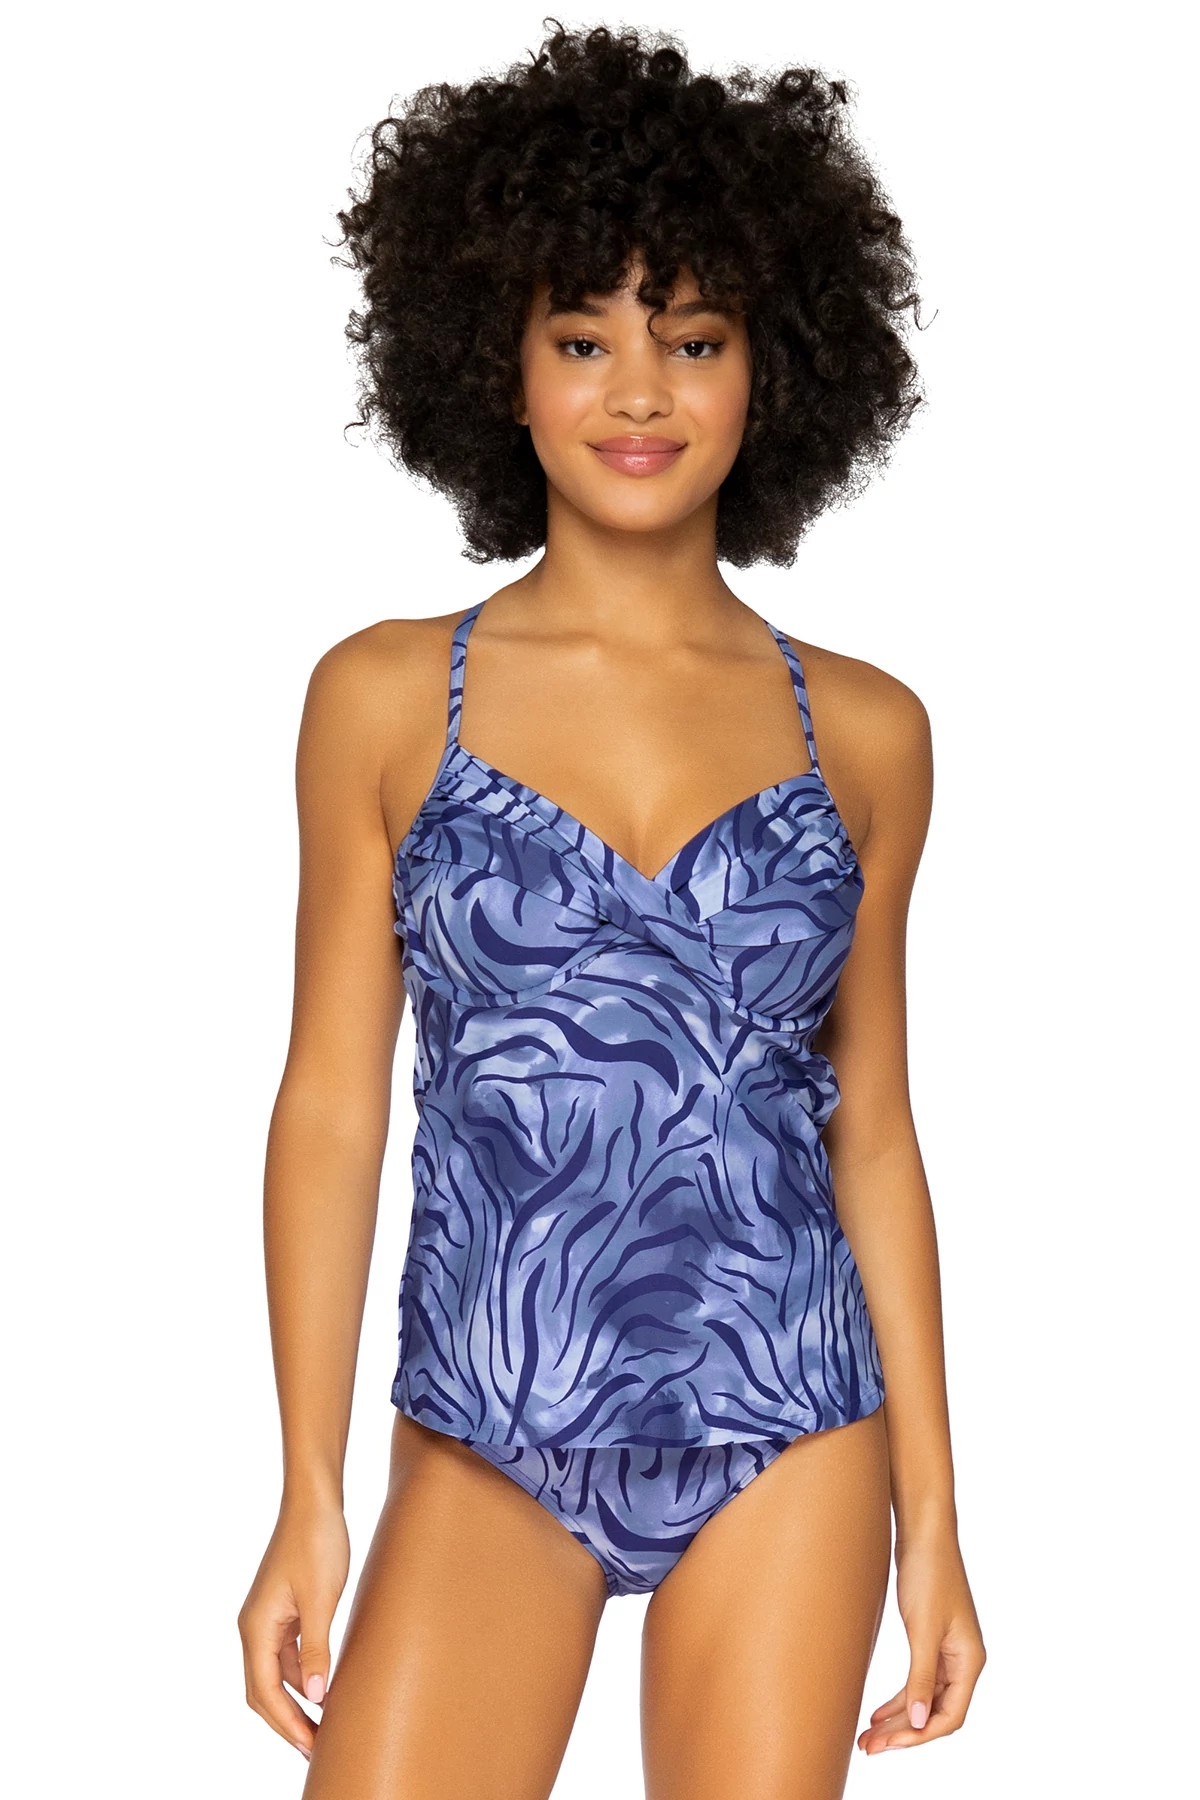 SUMATRA Crossroads Over The Shoulder Tankini Top (D+ Cup) image number 1